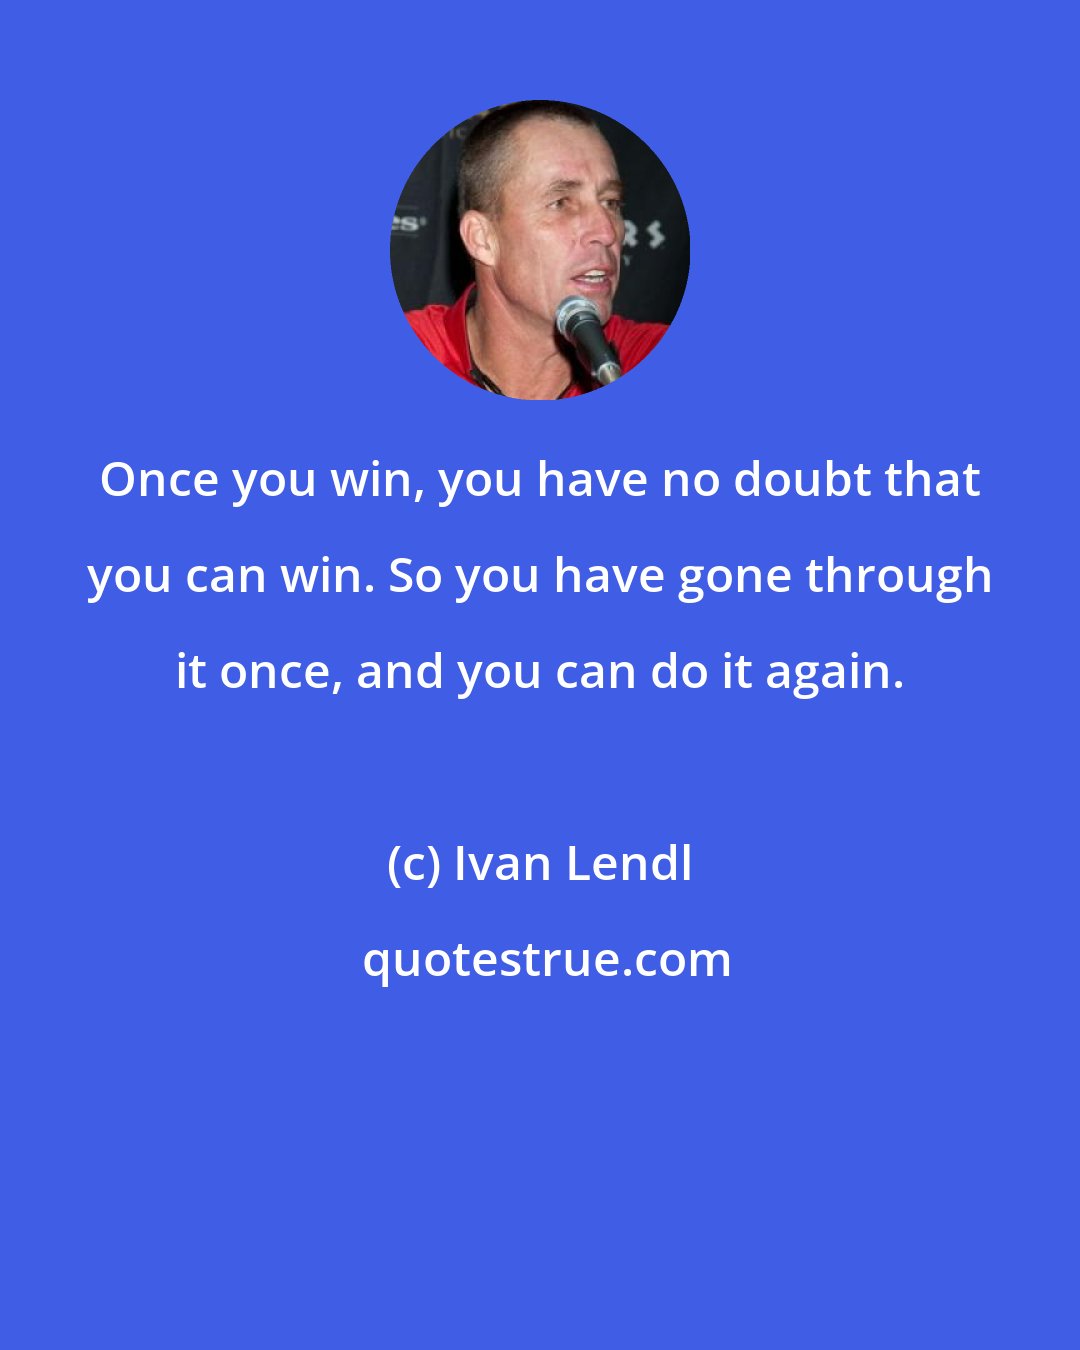 Ivan Lendl: Once you win, you have no doubt that you can win. So you have gone through it once, and you can do it again.